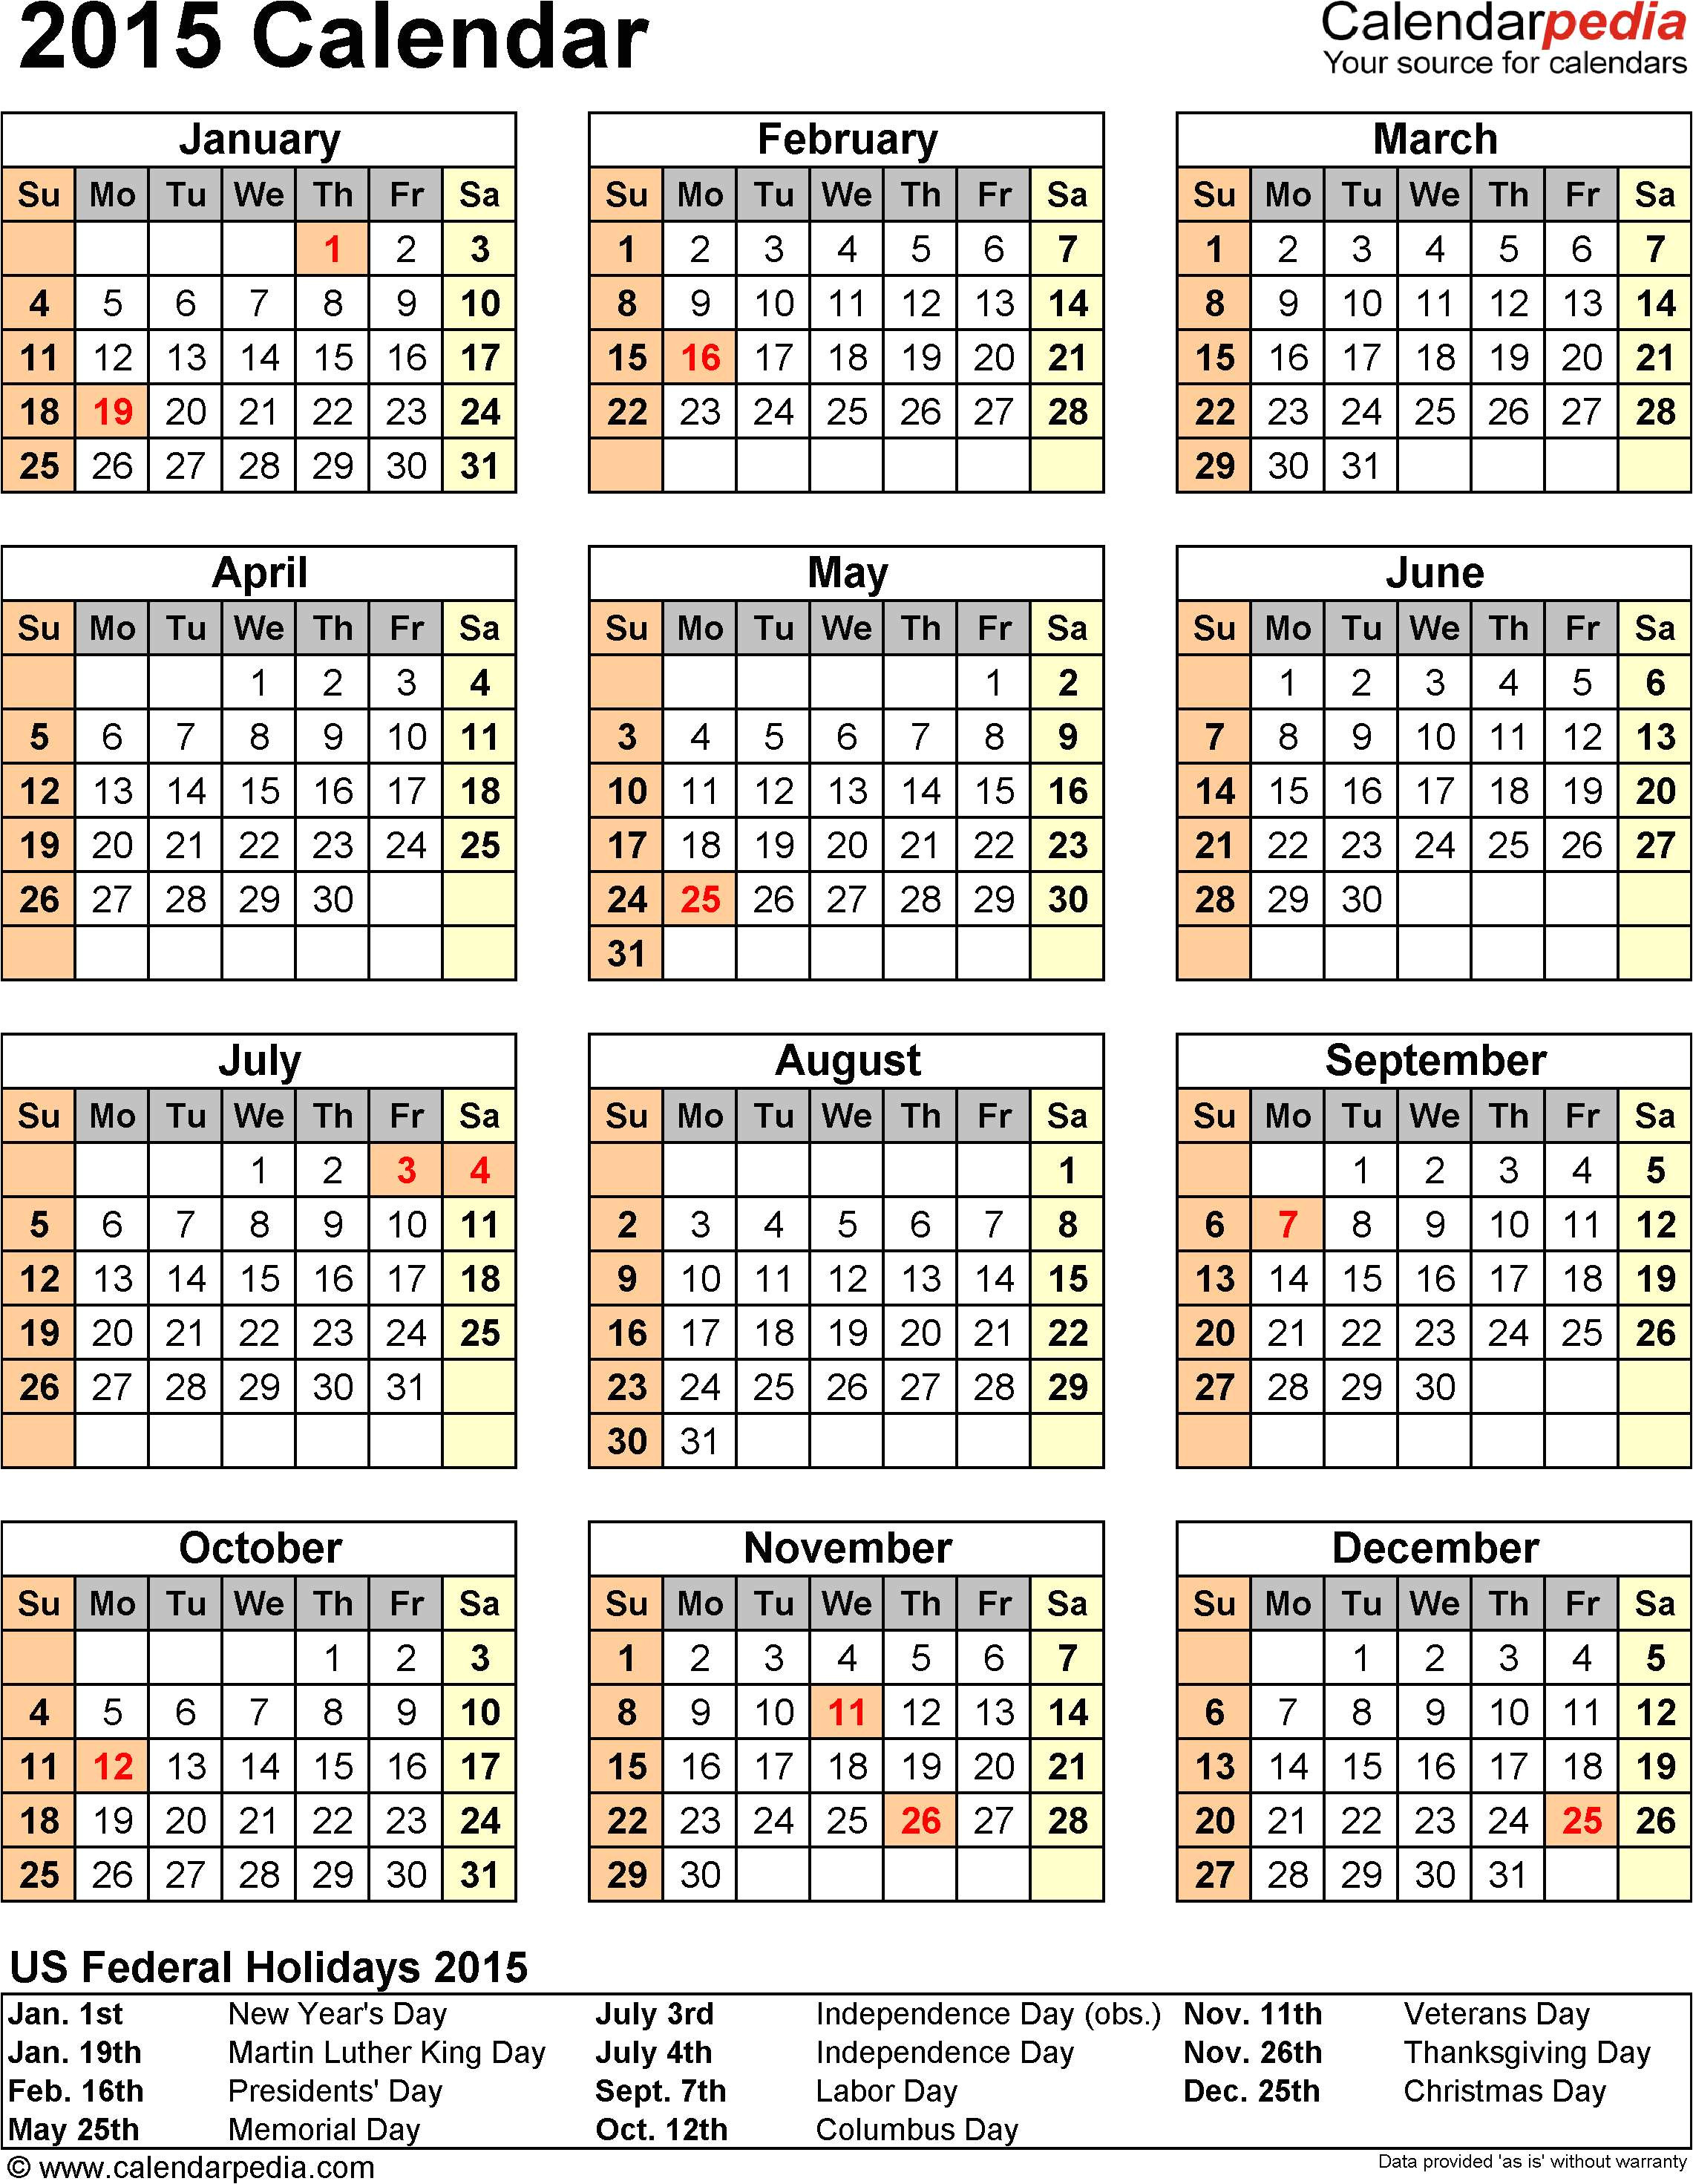 2015 Holiday Calendar Template 2015 Calendar with Federal Holidays Excel Pdf Word Templates